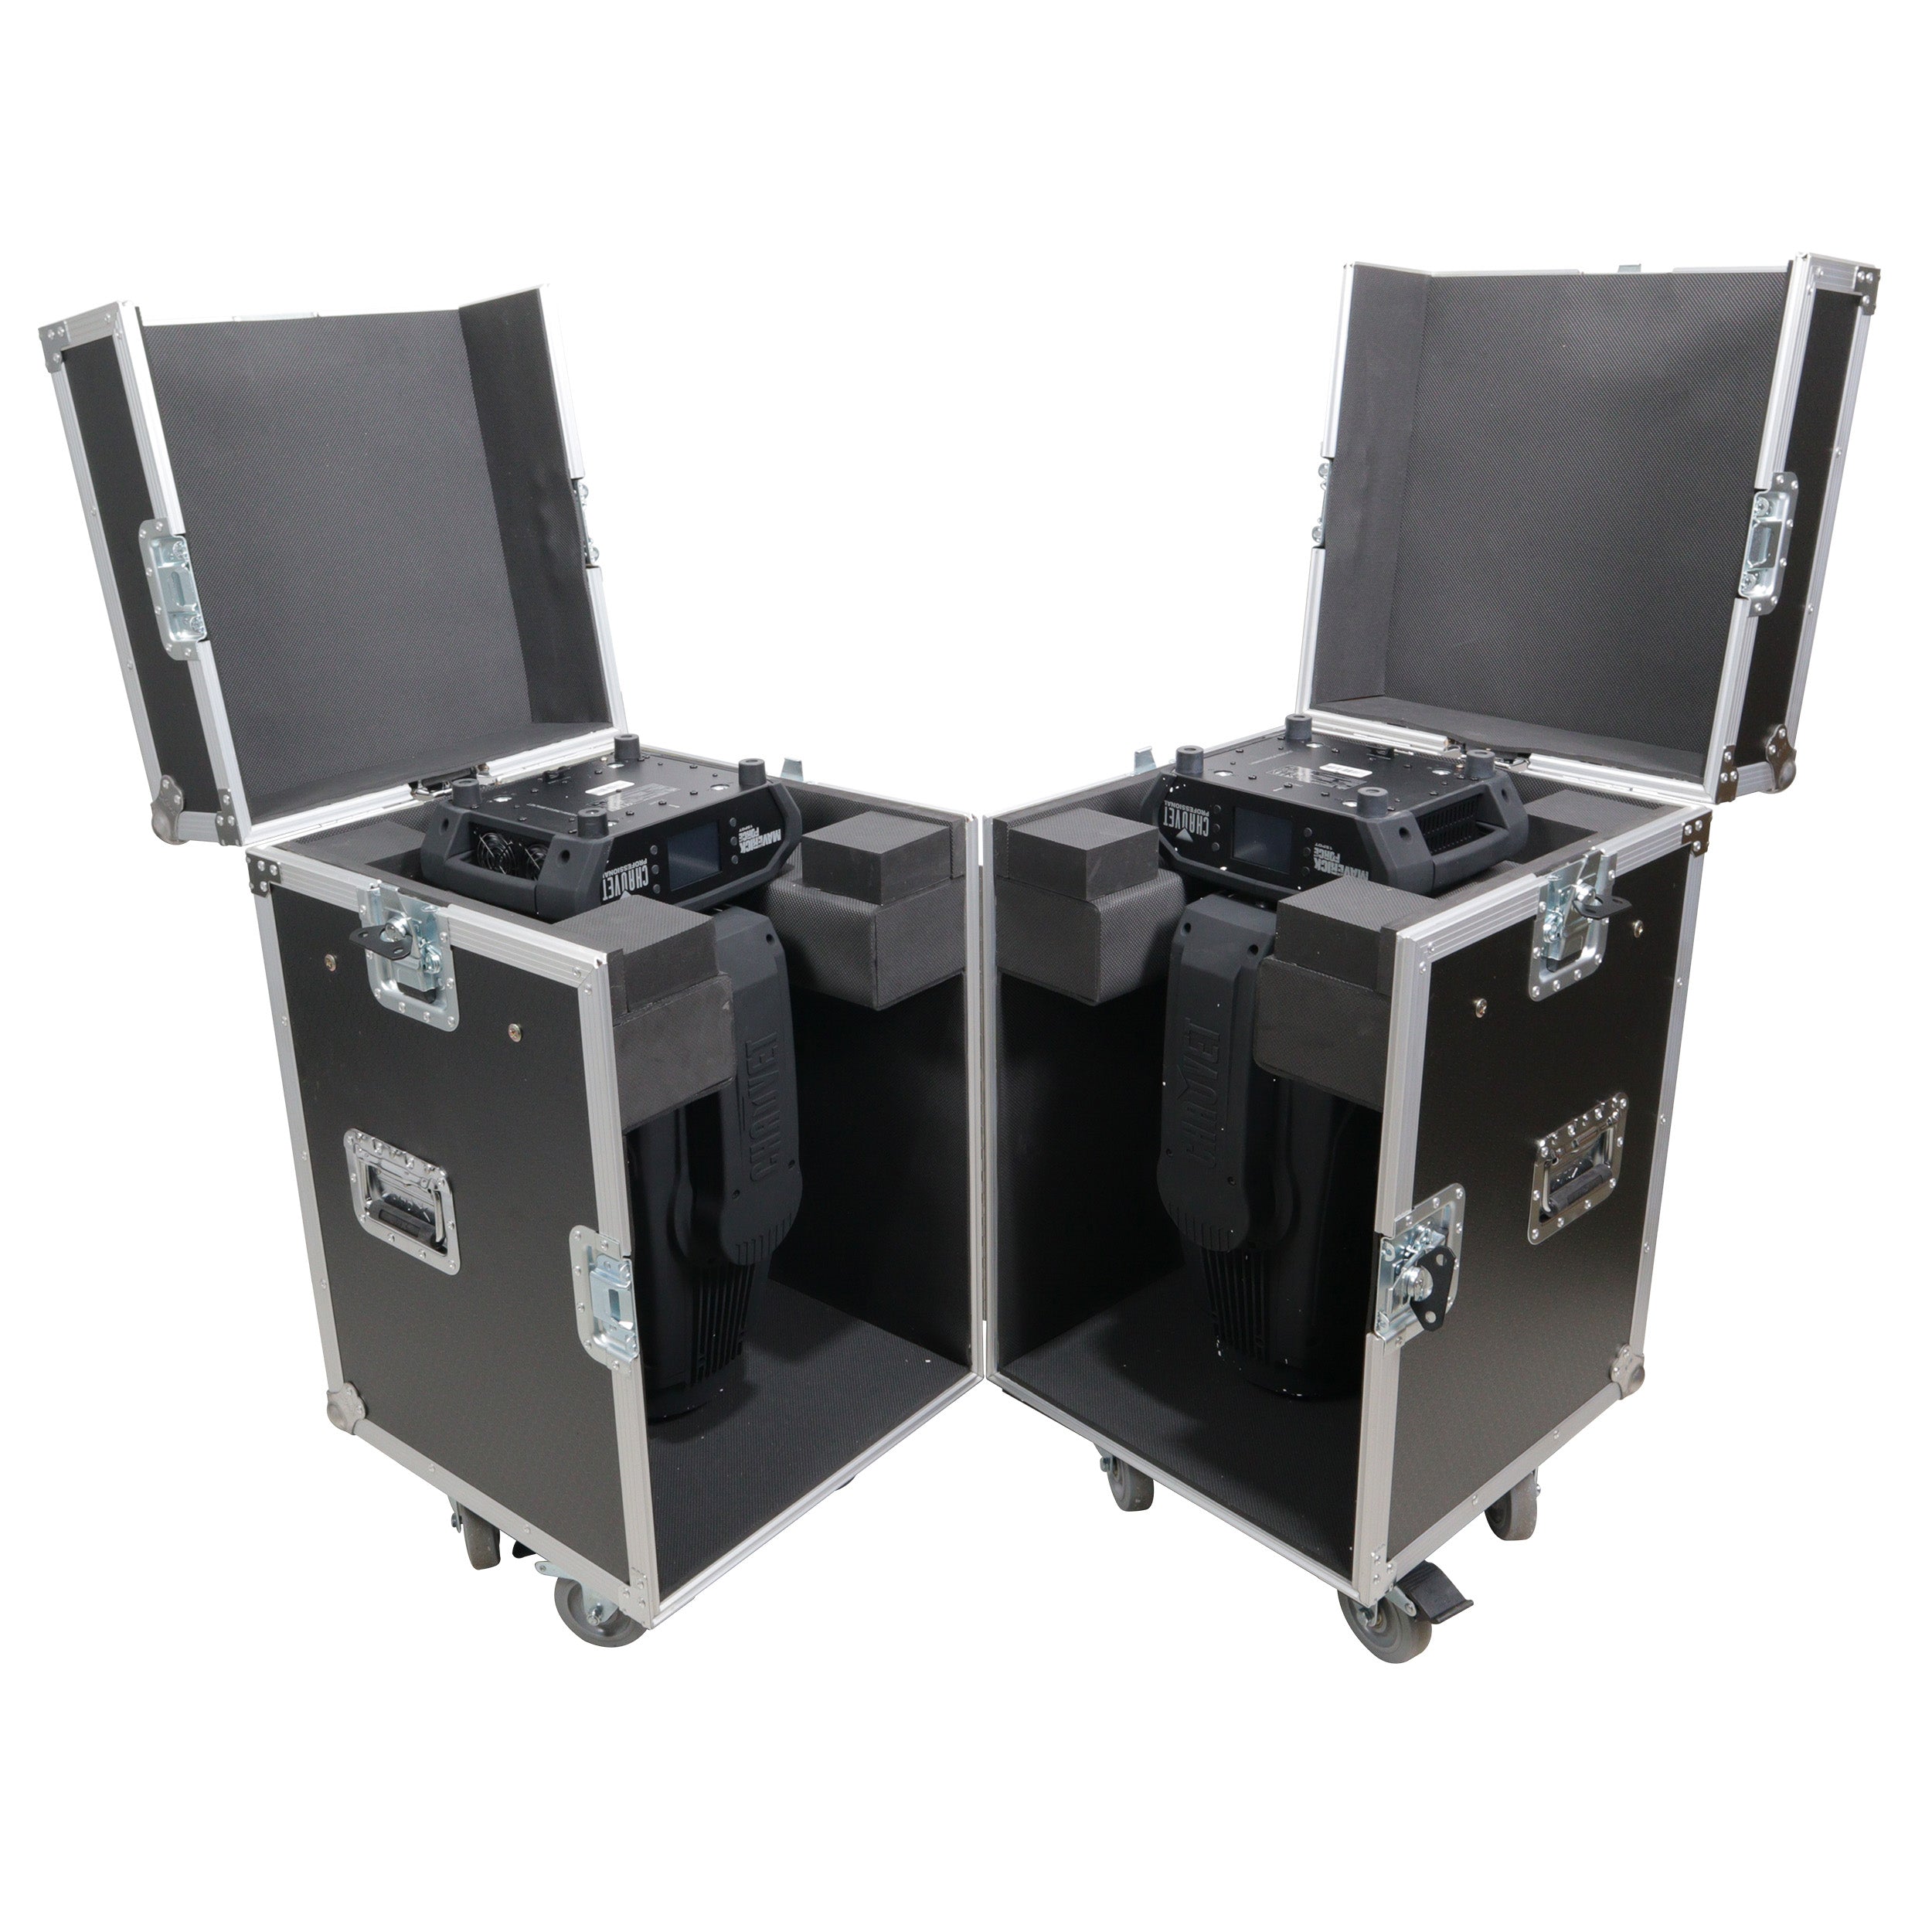 Pro X ATA Flight Style Road Case for (2) Moving Head Lighting Fixtures with (6) 4 inch Casters XS-MH275X2W